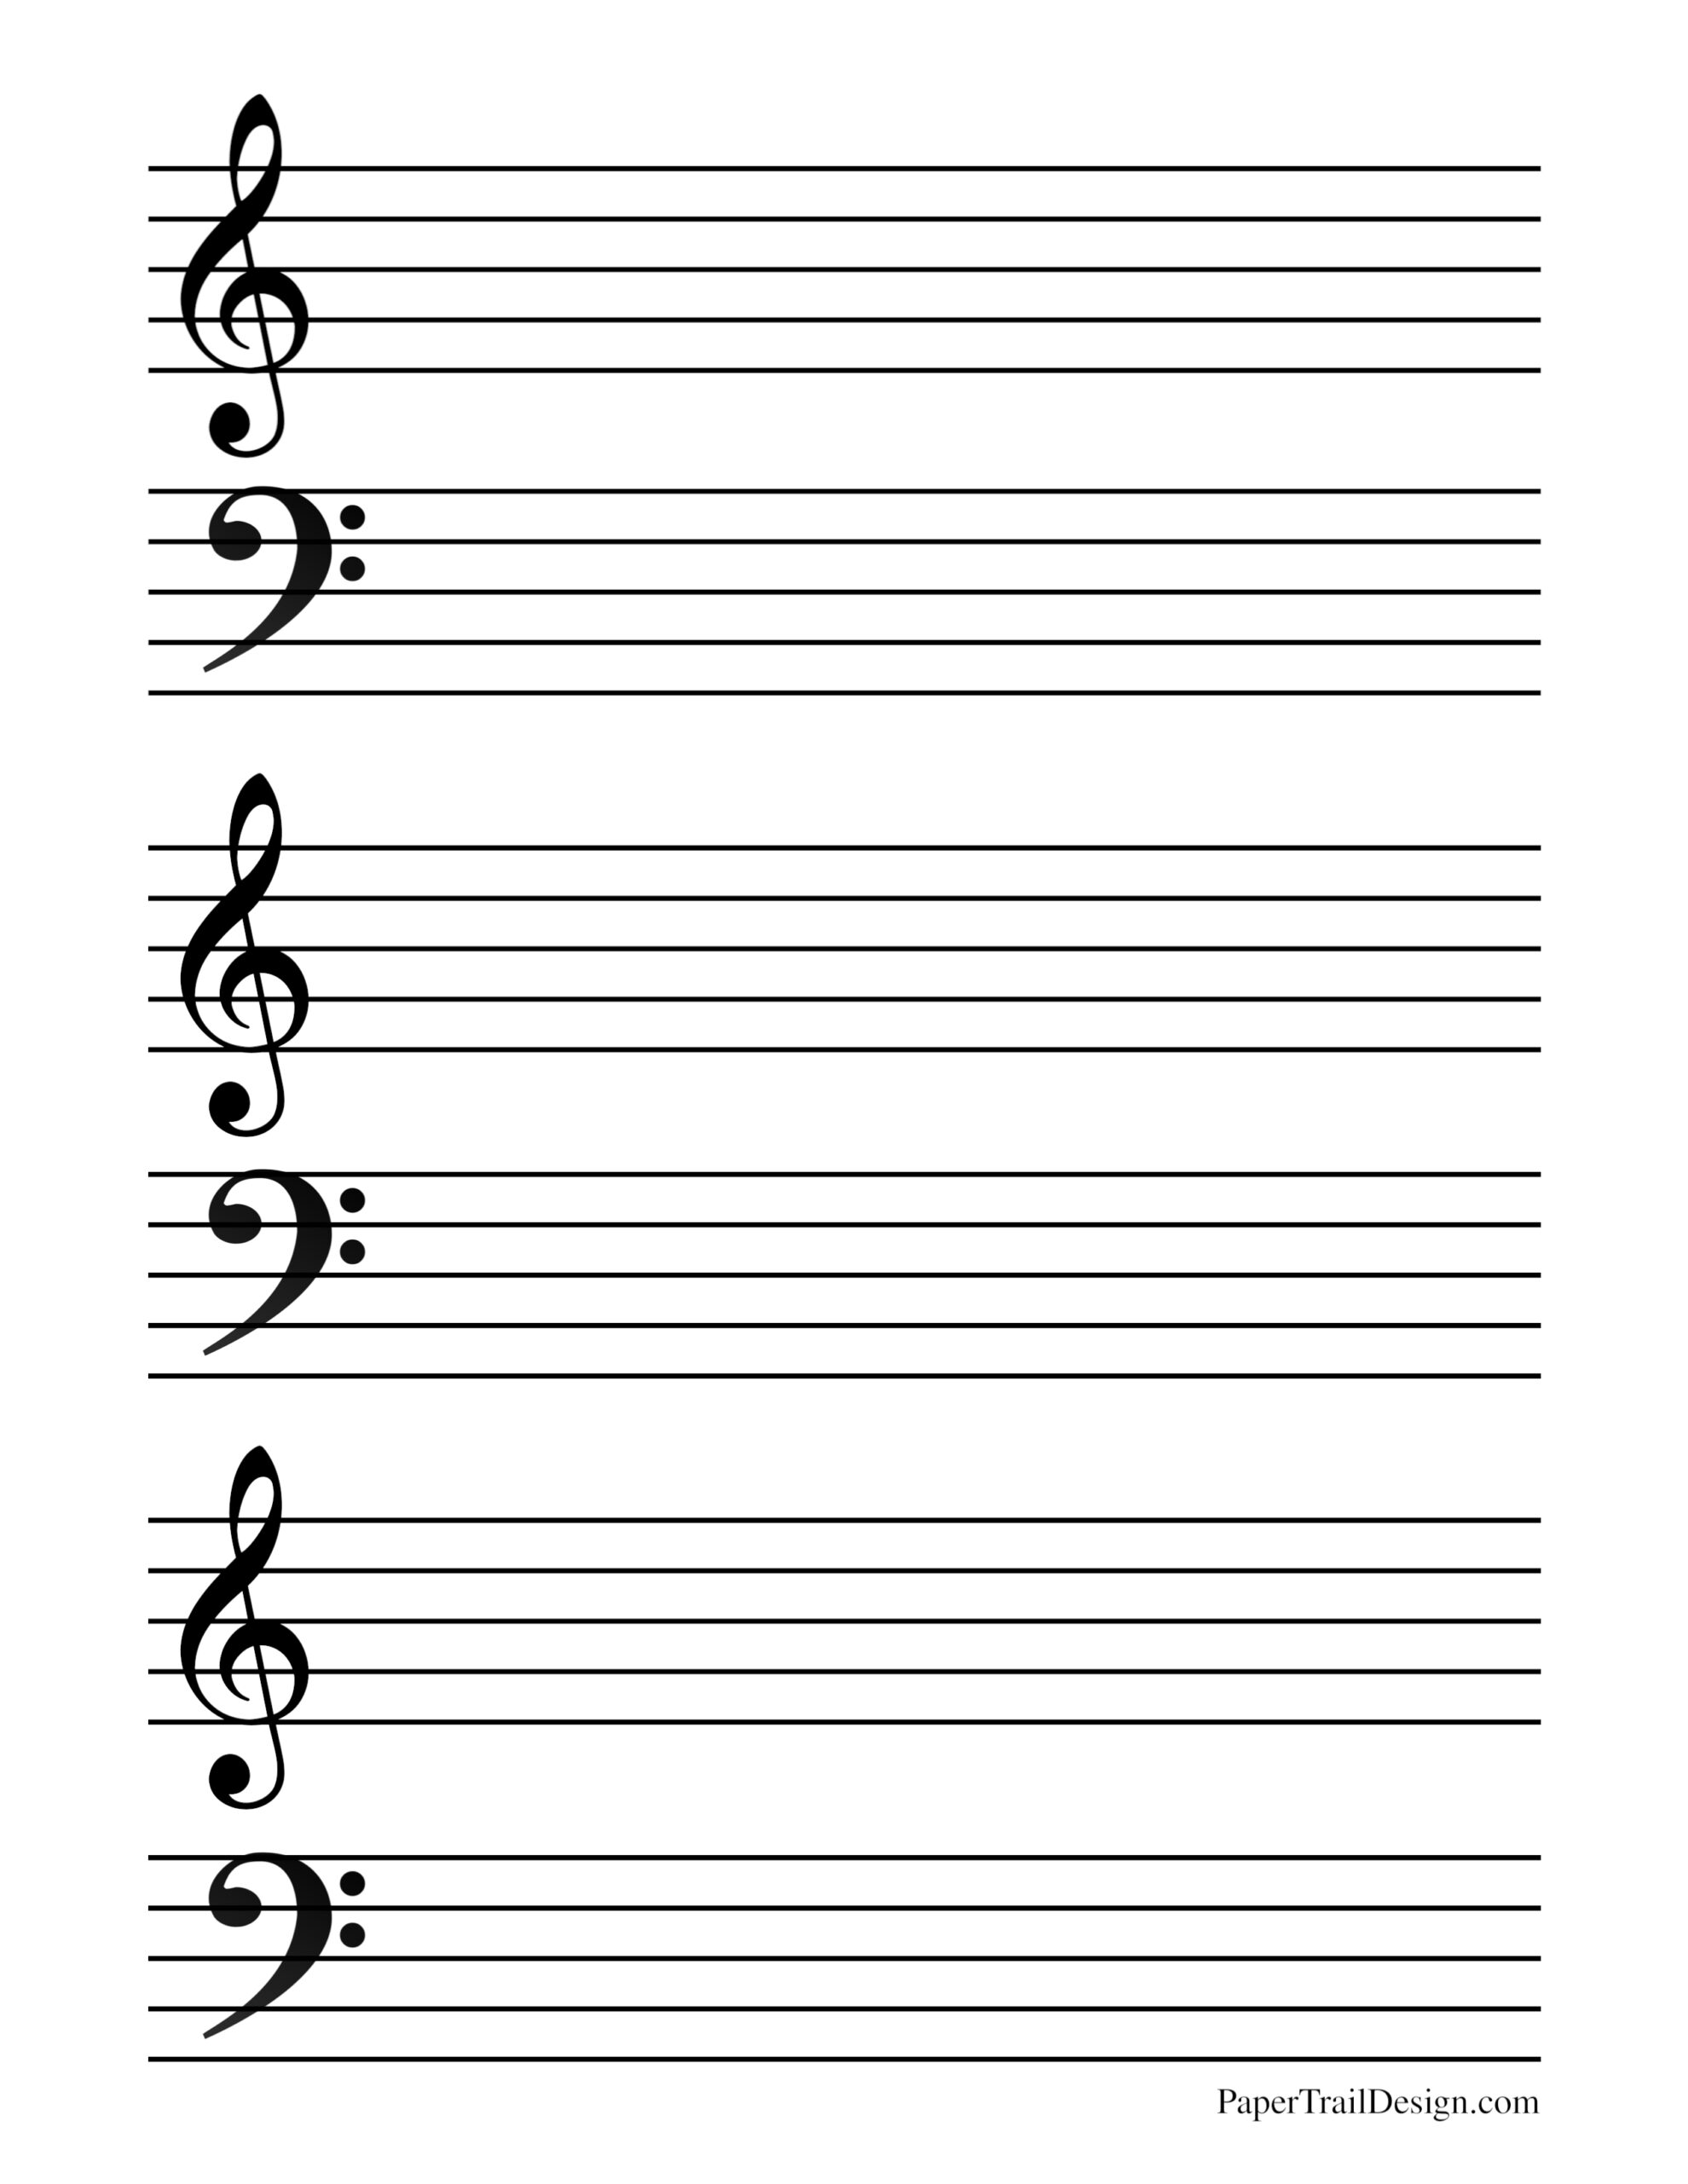 music-staff-paper-free-printable-get-what-you-need-for-free